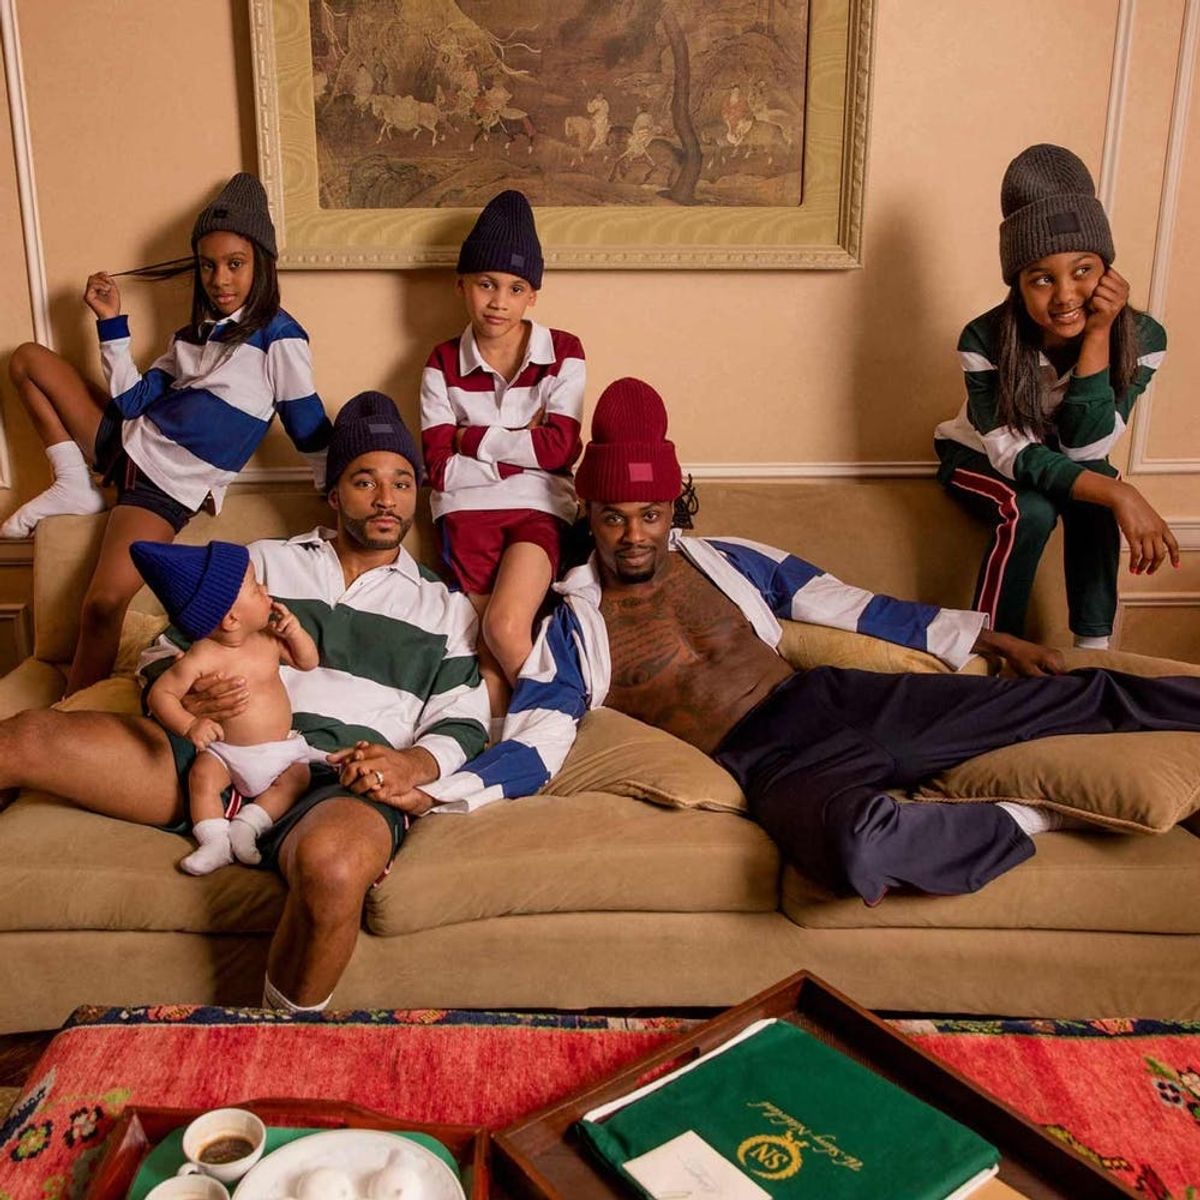 Those Instagram-Famous Dads and Their 4 Kids Get Tapped for Fashion Campaign